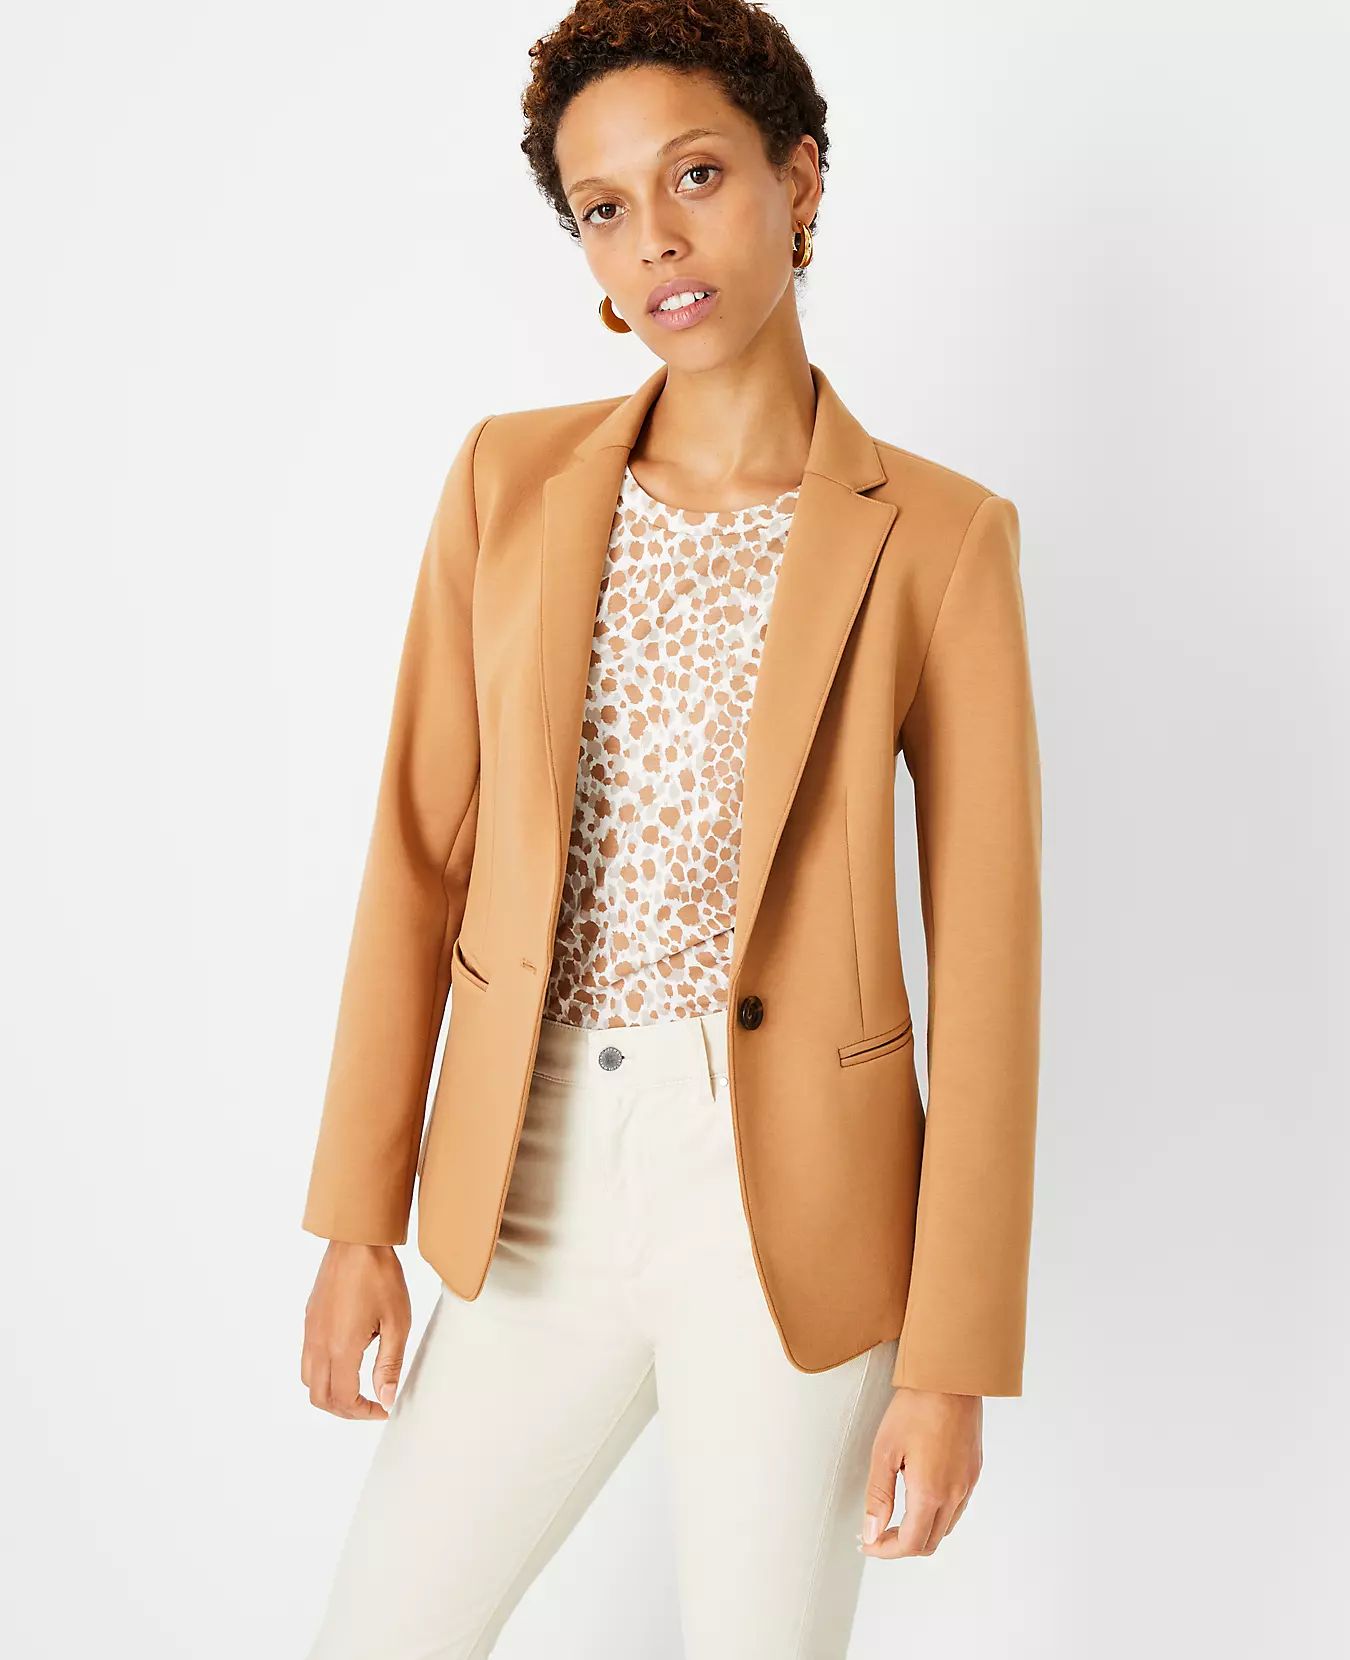 The Hutton Blazer in Double Knit | Ann Taylor (US)